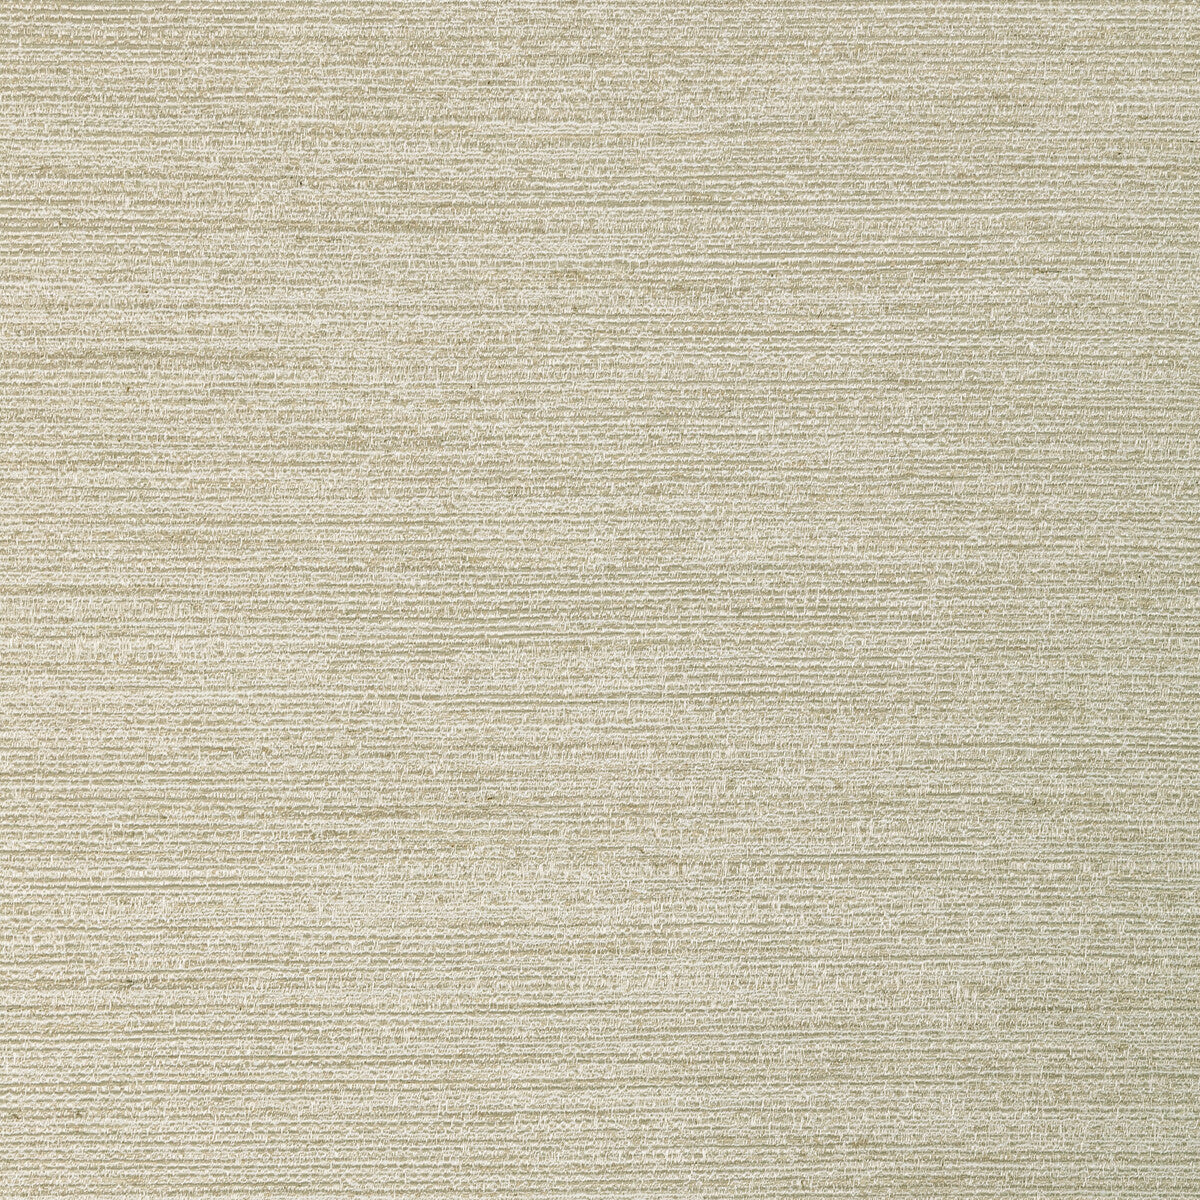 Cultivate fabric in wheat color - pattern 4957.416.0 - by Kravet Couture in the Modern Luxe Silk Luster collection